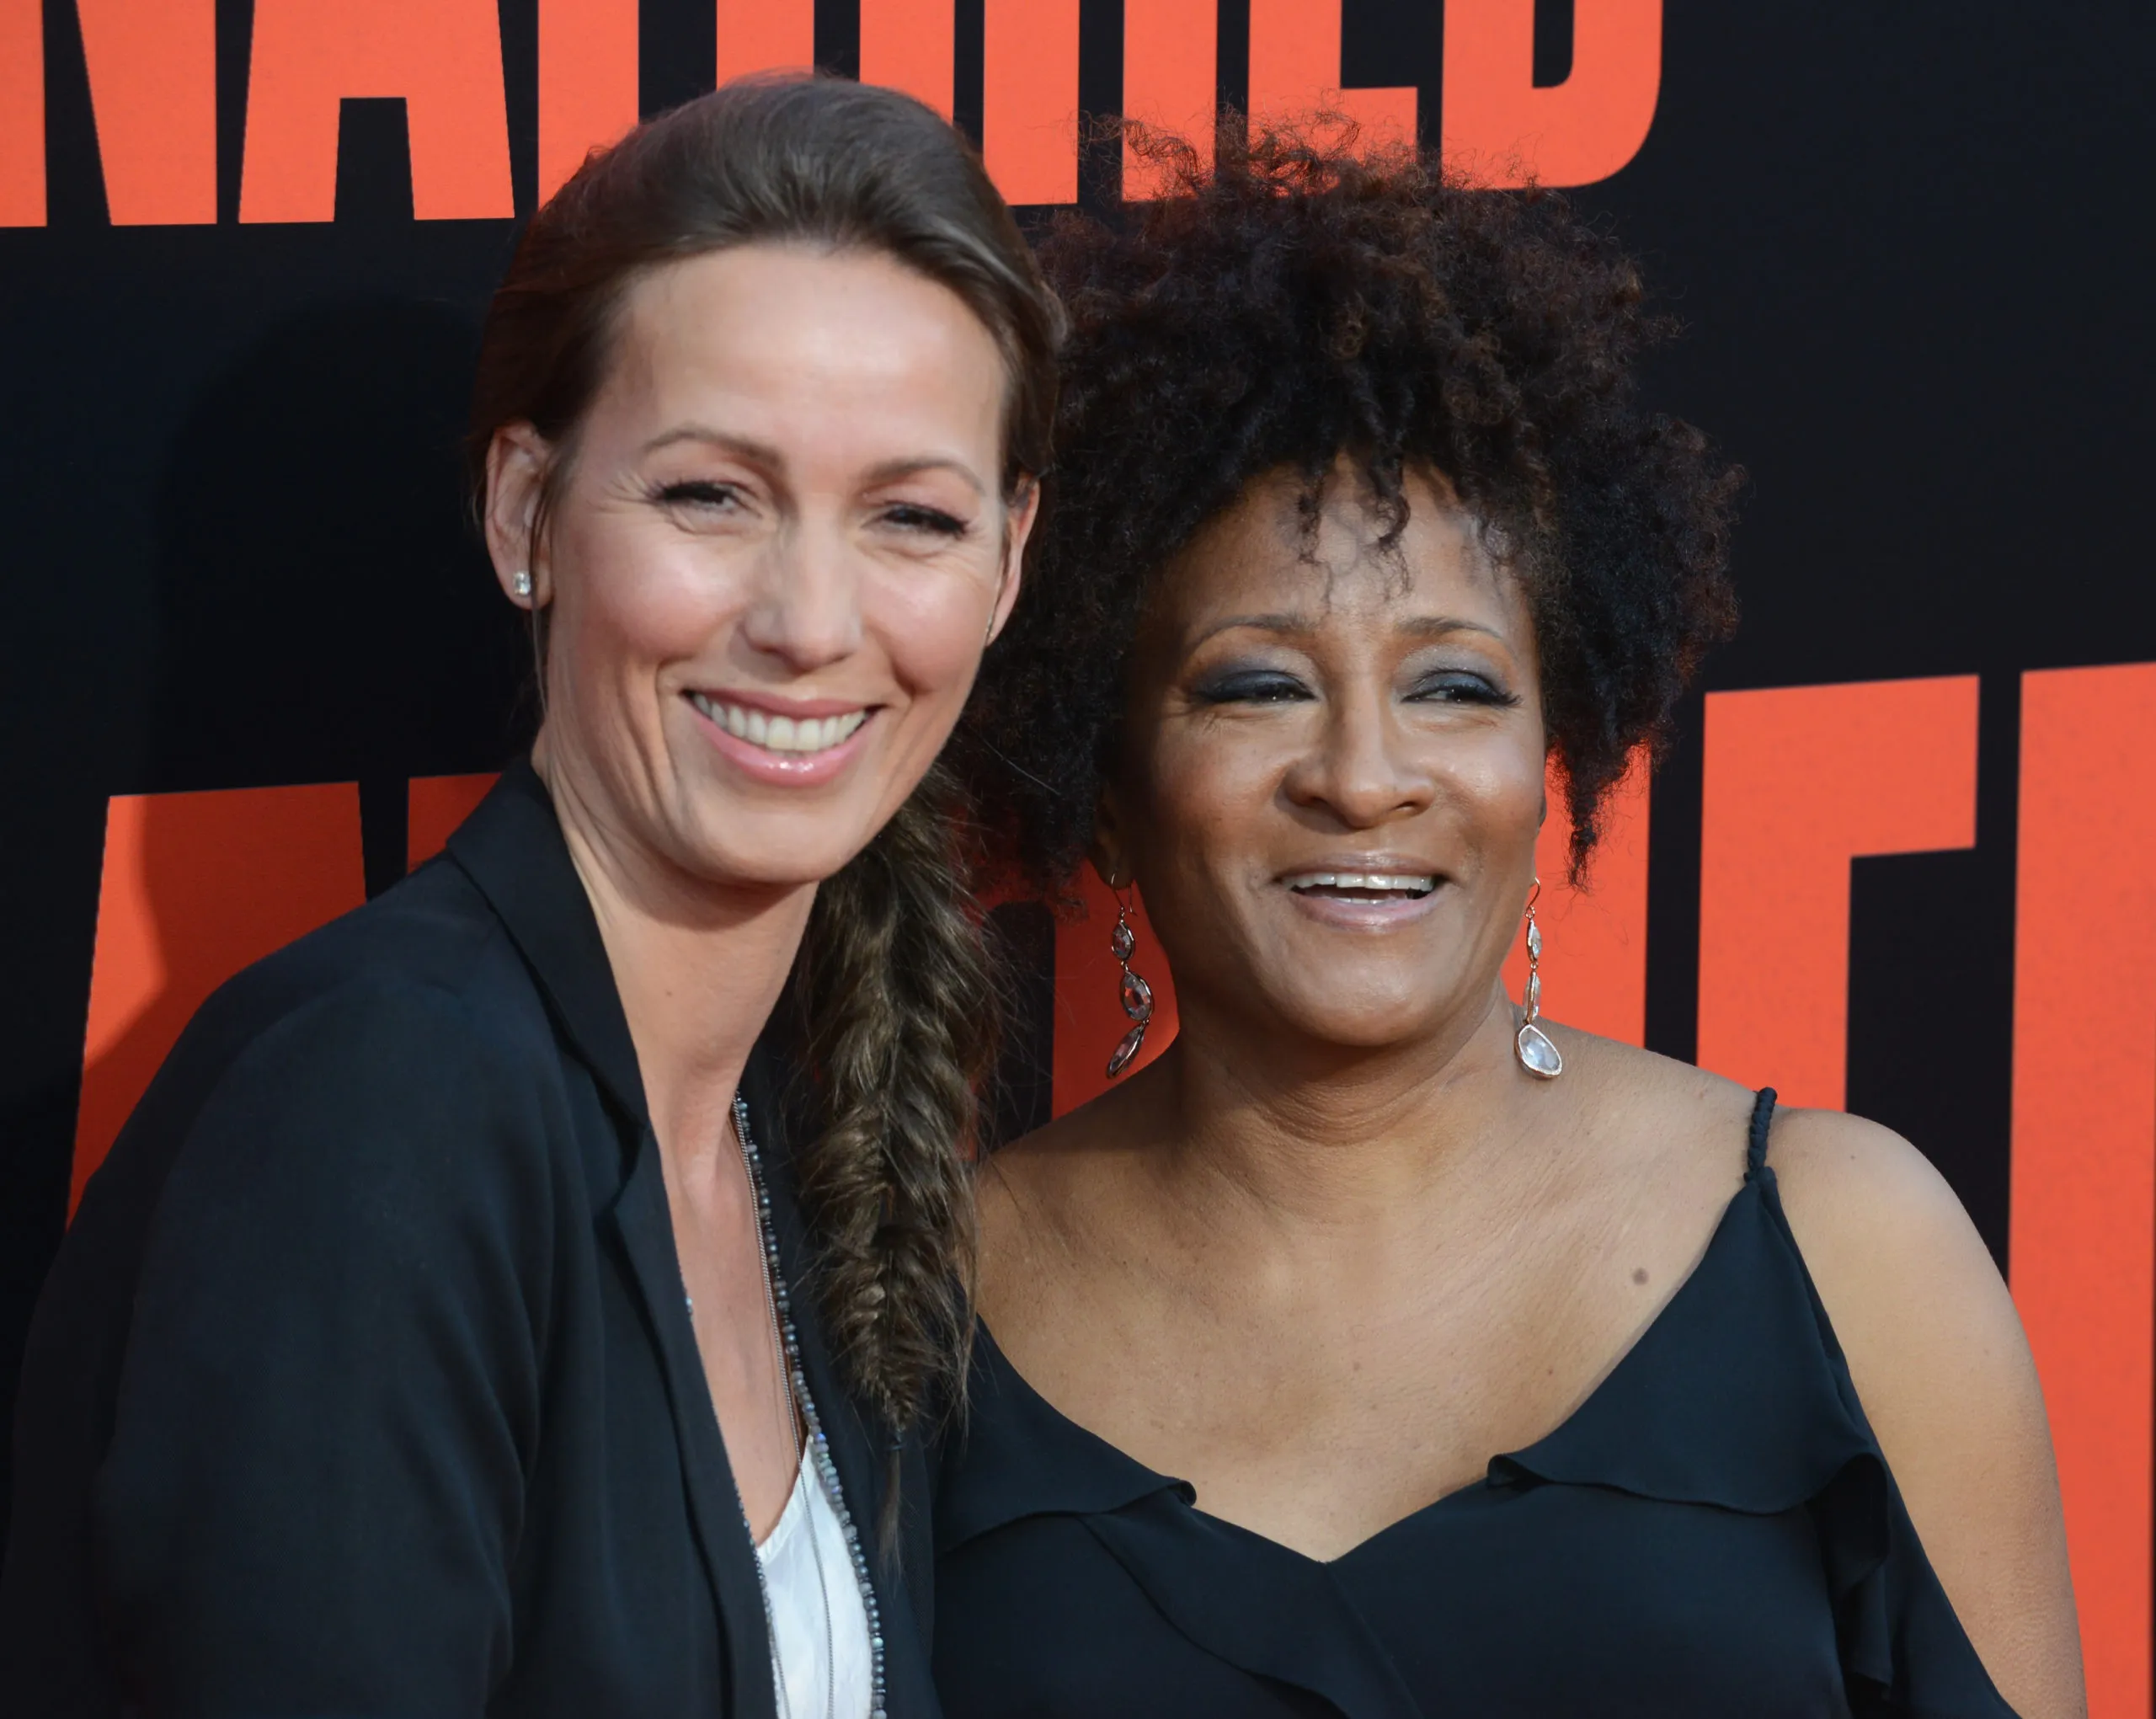 Wanda Sykes on coming out as lesbian Equality not just for white gay